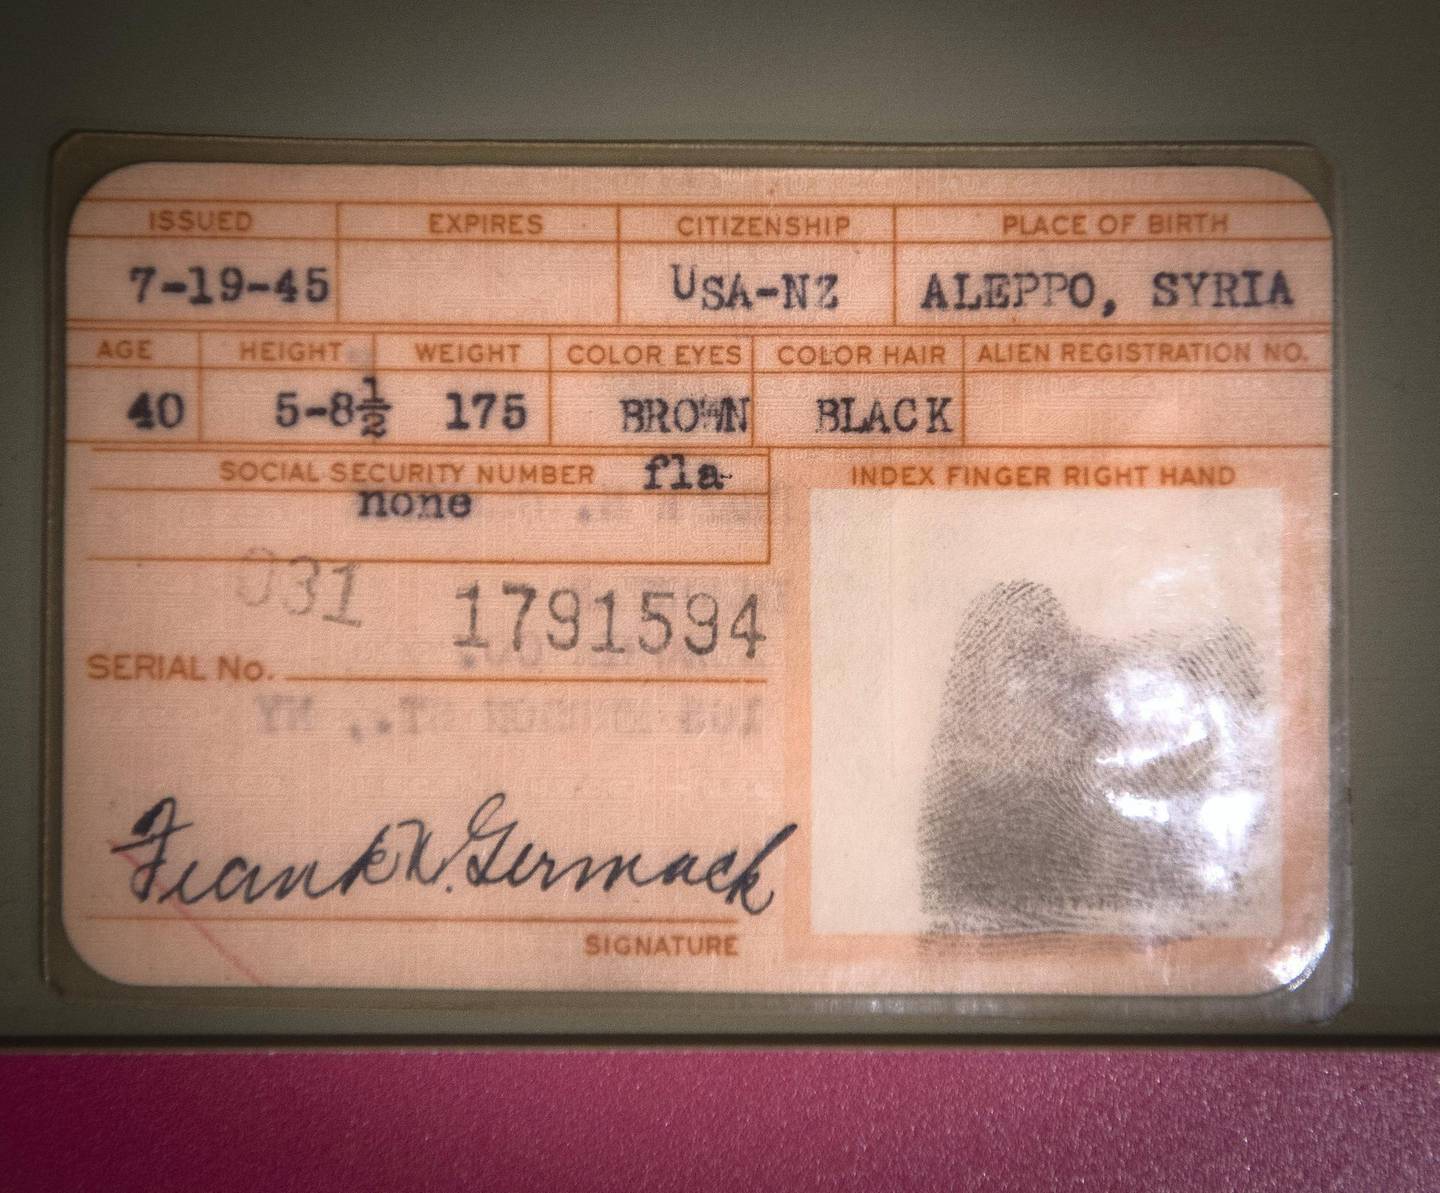 The Port Authority I.D. card used by Syrian immigrant Frank Germack, on display at the exhibition, "Little Syria, NY, An Immigrant Community's Life & Legacy" on view from October 1, 2016 - January 9, 2017 at the Ellis Island National Museum of Immigration, September 27, 2016, in New York. (Photo by Bryan R. Smith / AFP)